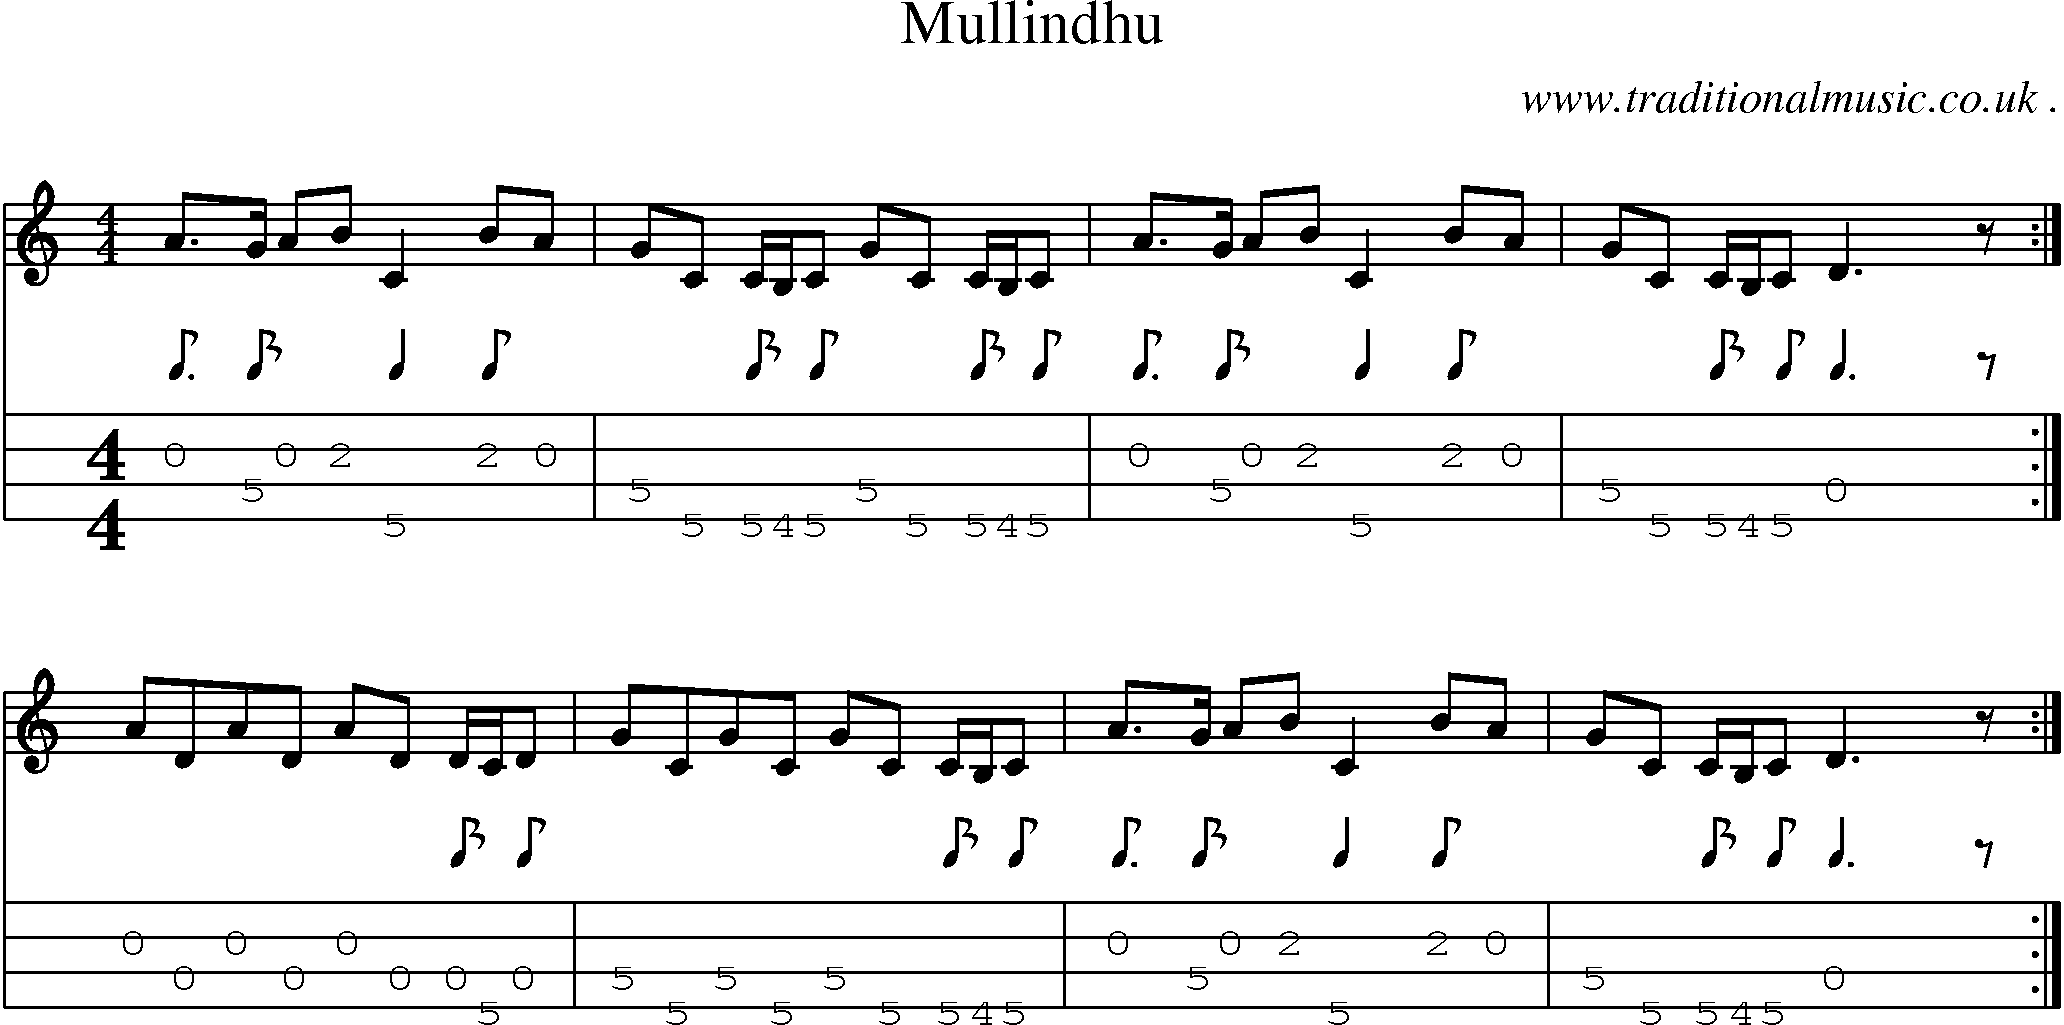 Sheet-music  score, Chords and Mandolin Tabs for Mullindhu